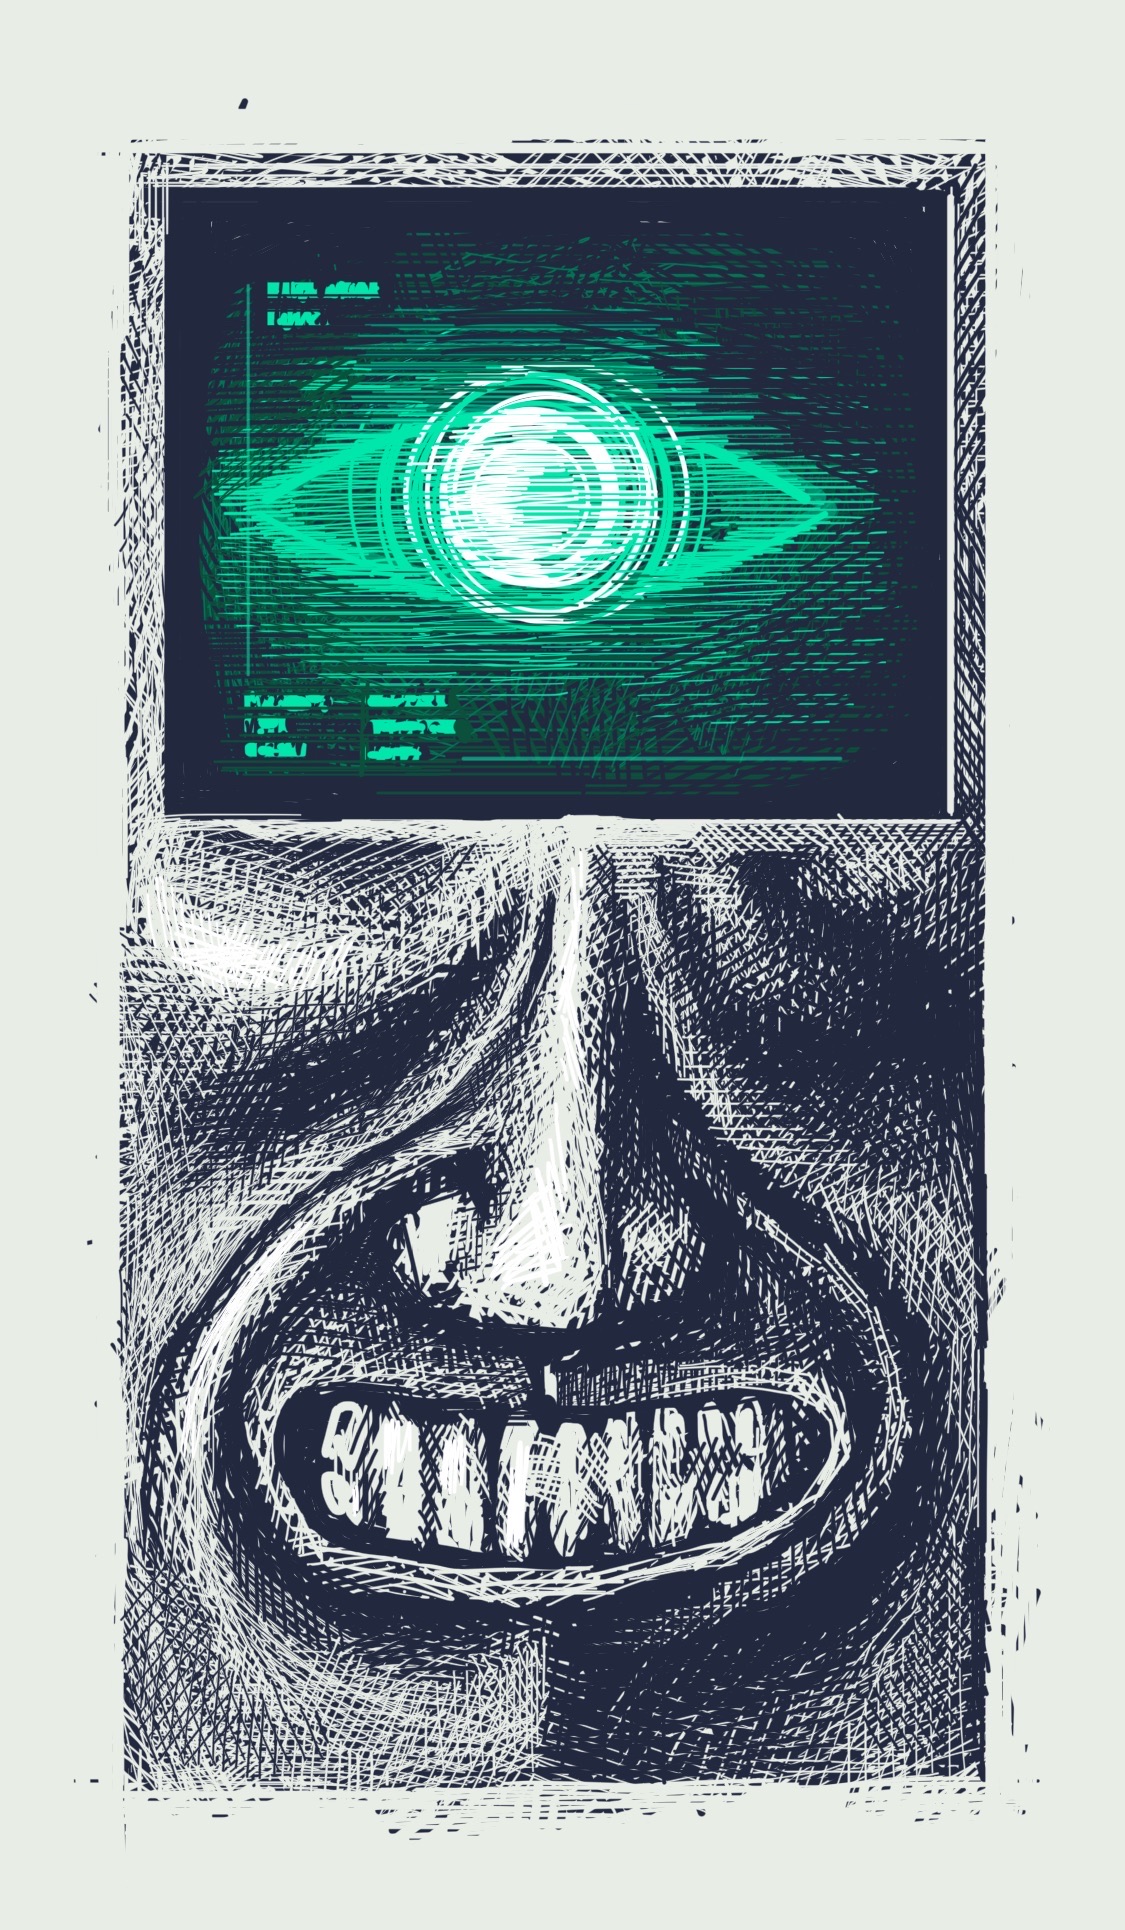 A grinning face where the eye is a green cathode ray tube with an eye and computer text